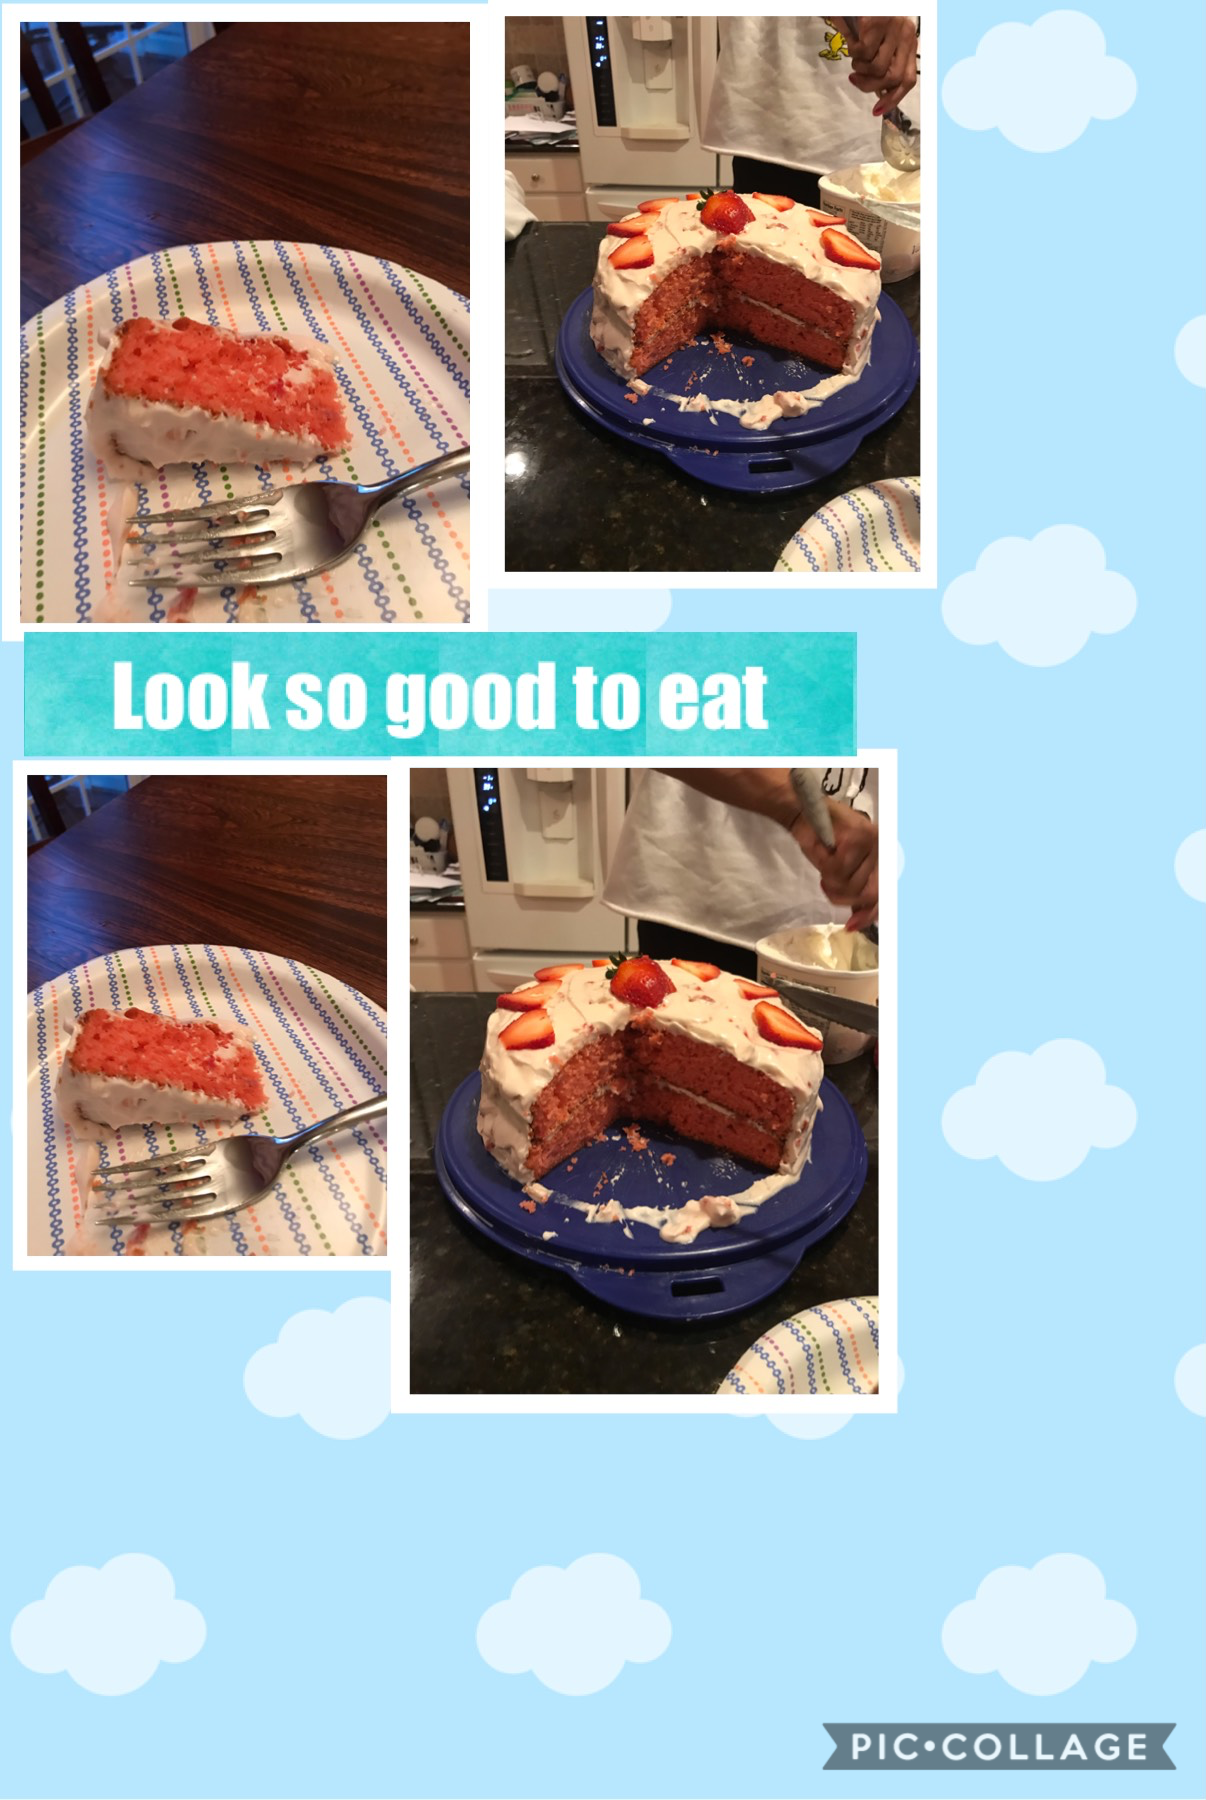 So good yummmmmm what do you think tell me how good does it look let me know And I ate it like what tip do you think it is let me know 

And I so sorry I have not been posting I got my phone took away 